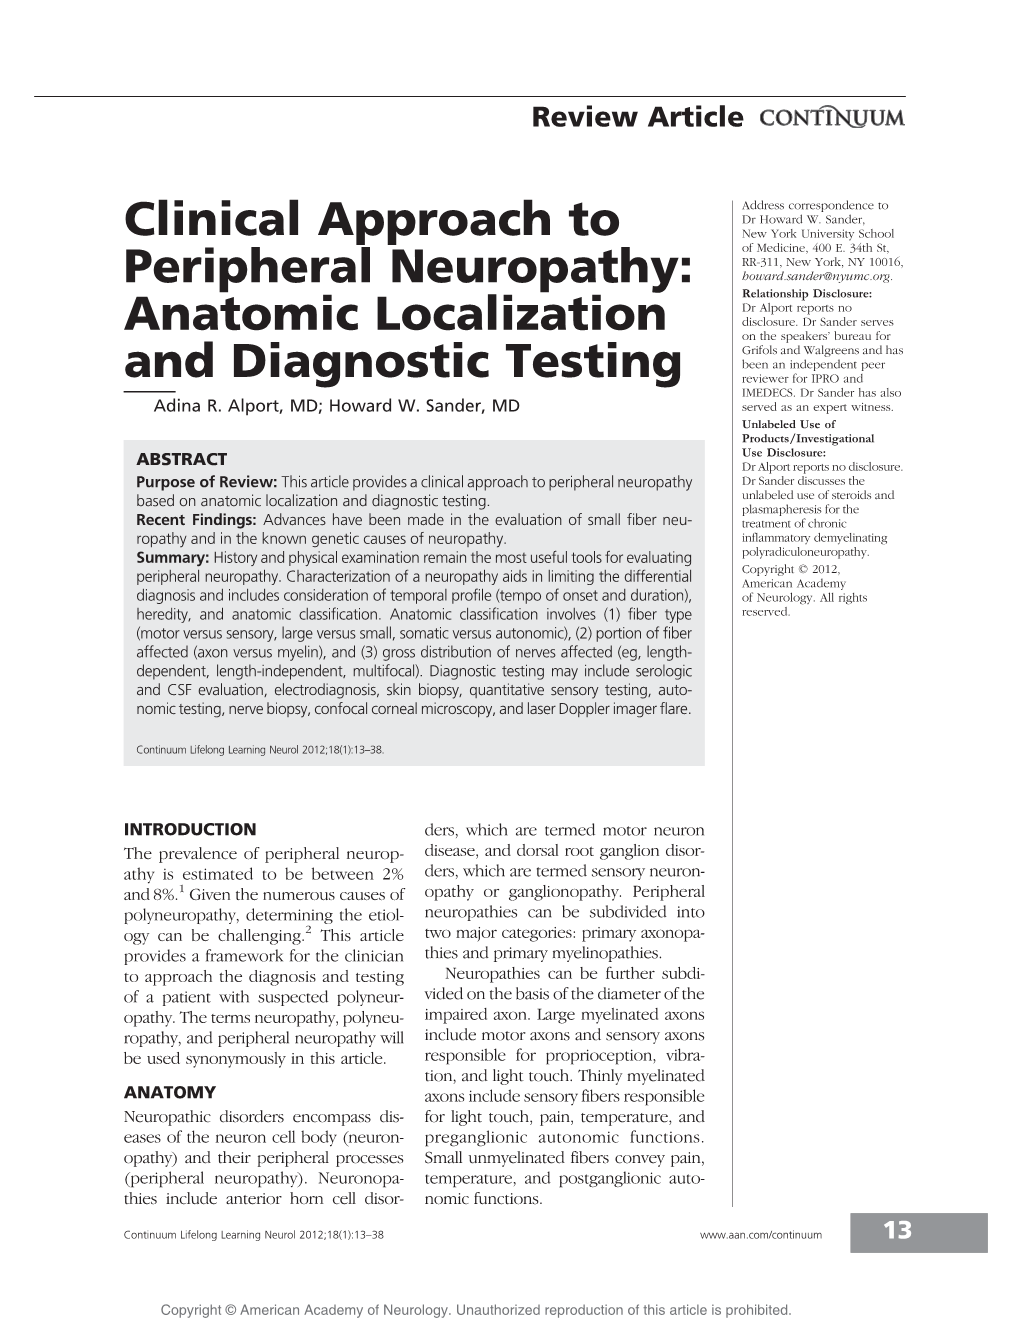 Clinical Approach to Peripheral Neuropathy: Anatomic Localization and Diagnostic Testing